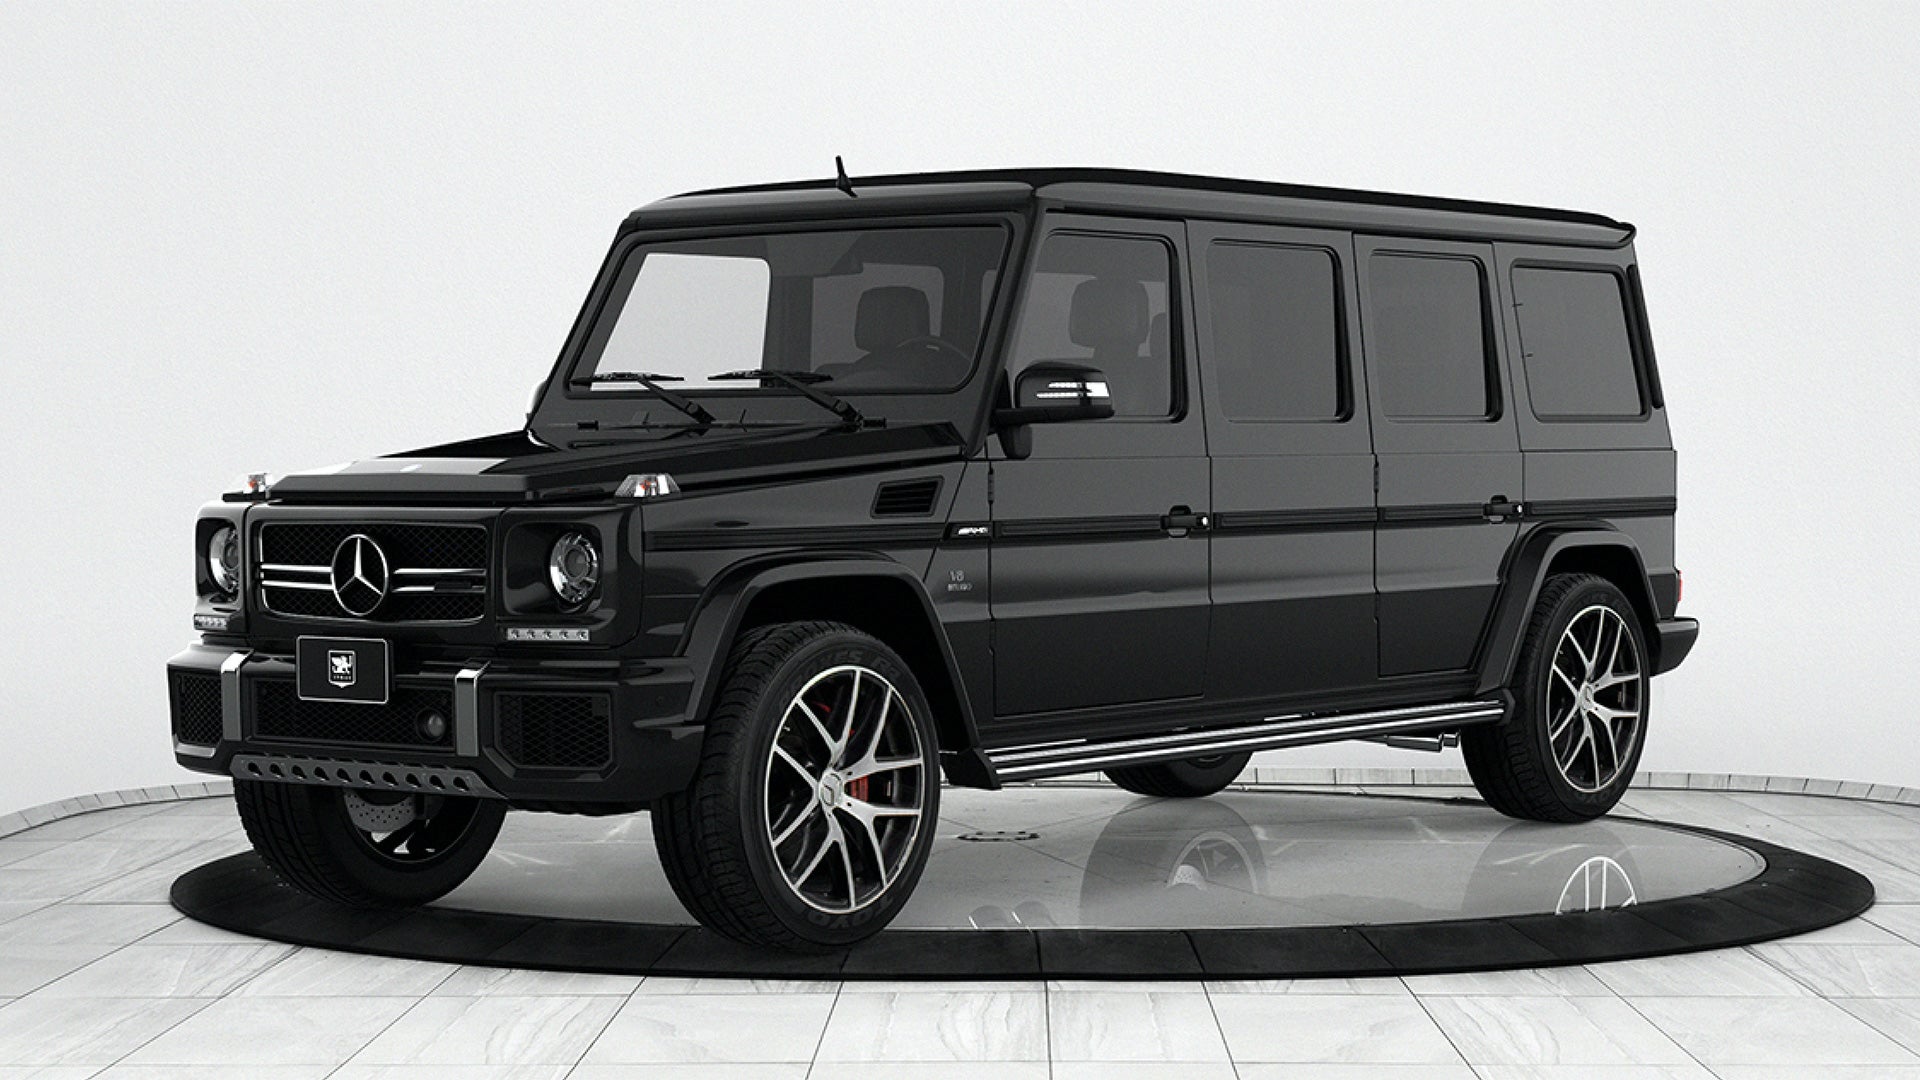 Oh Look, It’s a $1.2 Million, Bulletproof Mercedes-Benz G63 AMG Stretch Limo